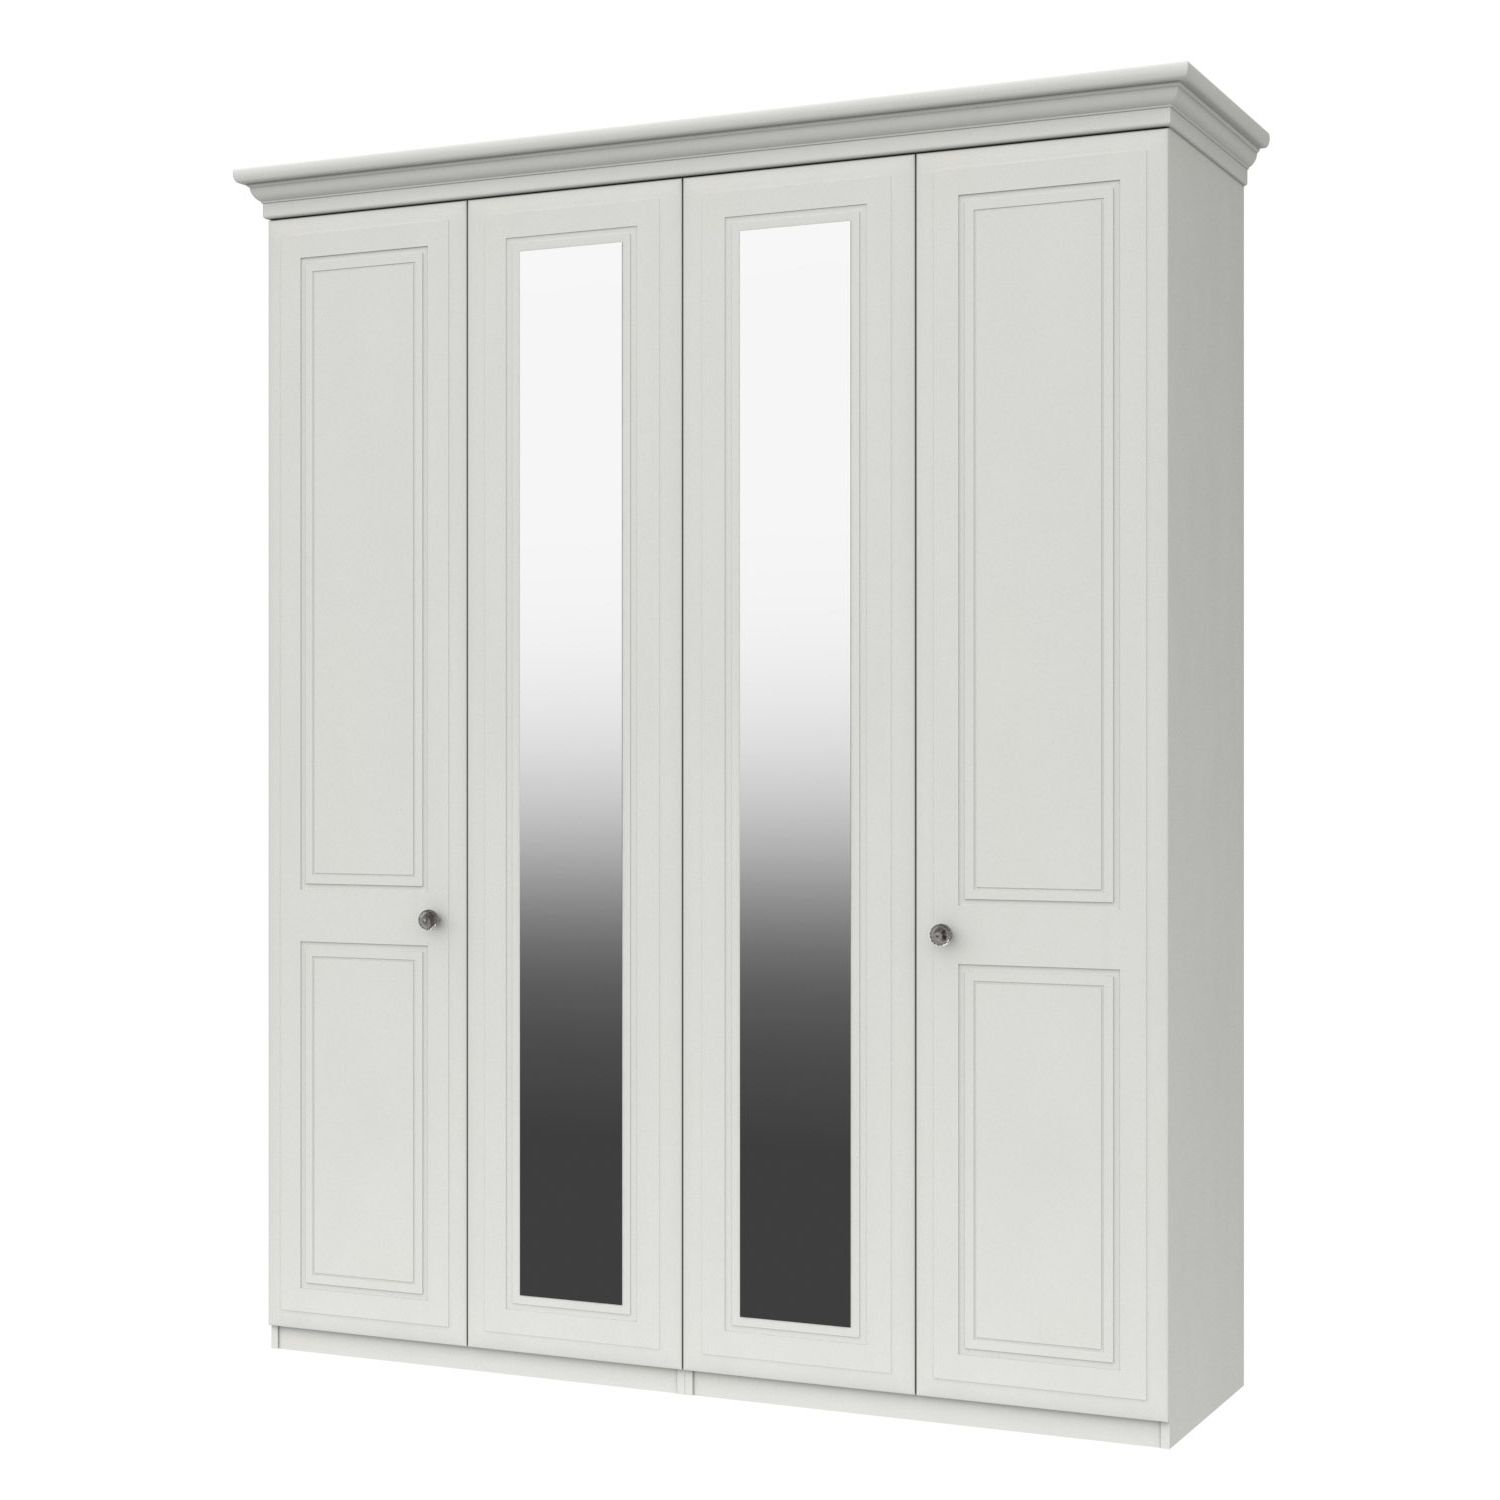 Tall 4 Door Wardrobe With 2 Mirrors – Tr Hayes Furniture Bath Within Tall White Wardrobes (Gallery 3 of 20)